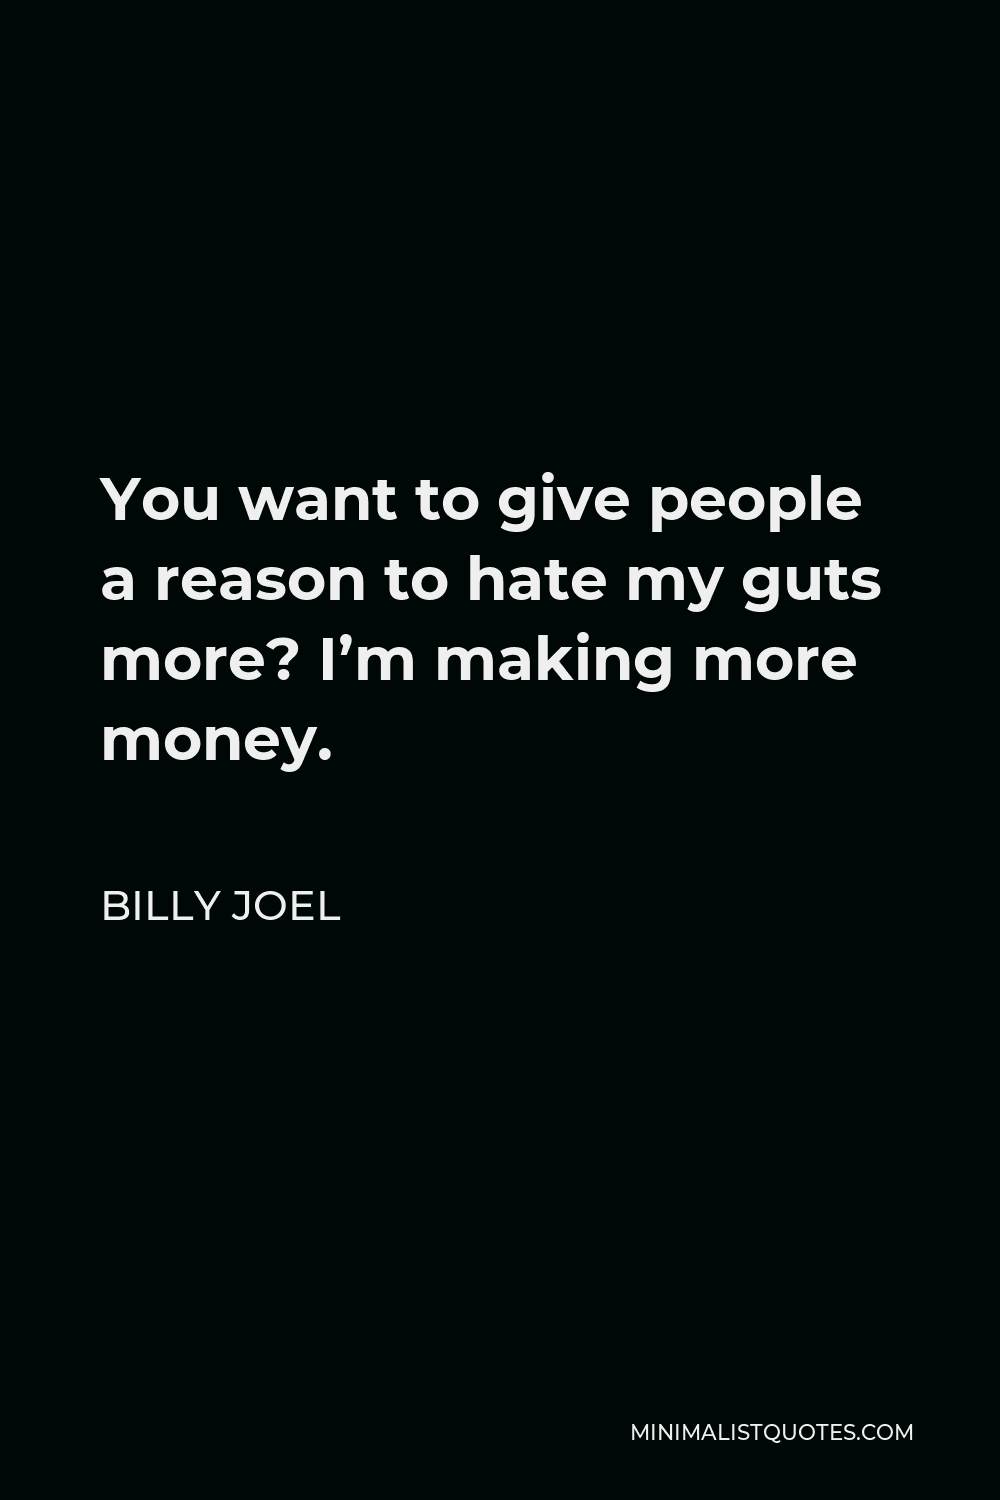 Billy Joel Quote - You want to give people a reason to hate my guts more? I’m making more money.